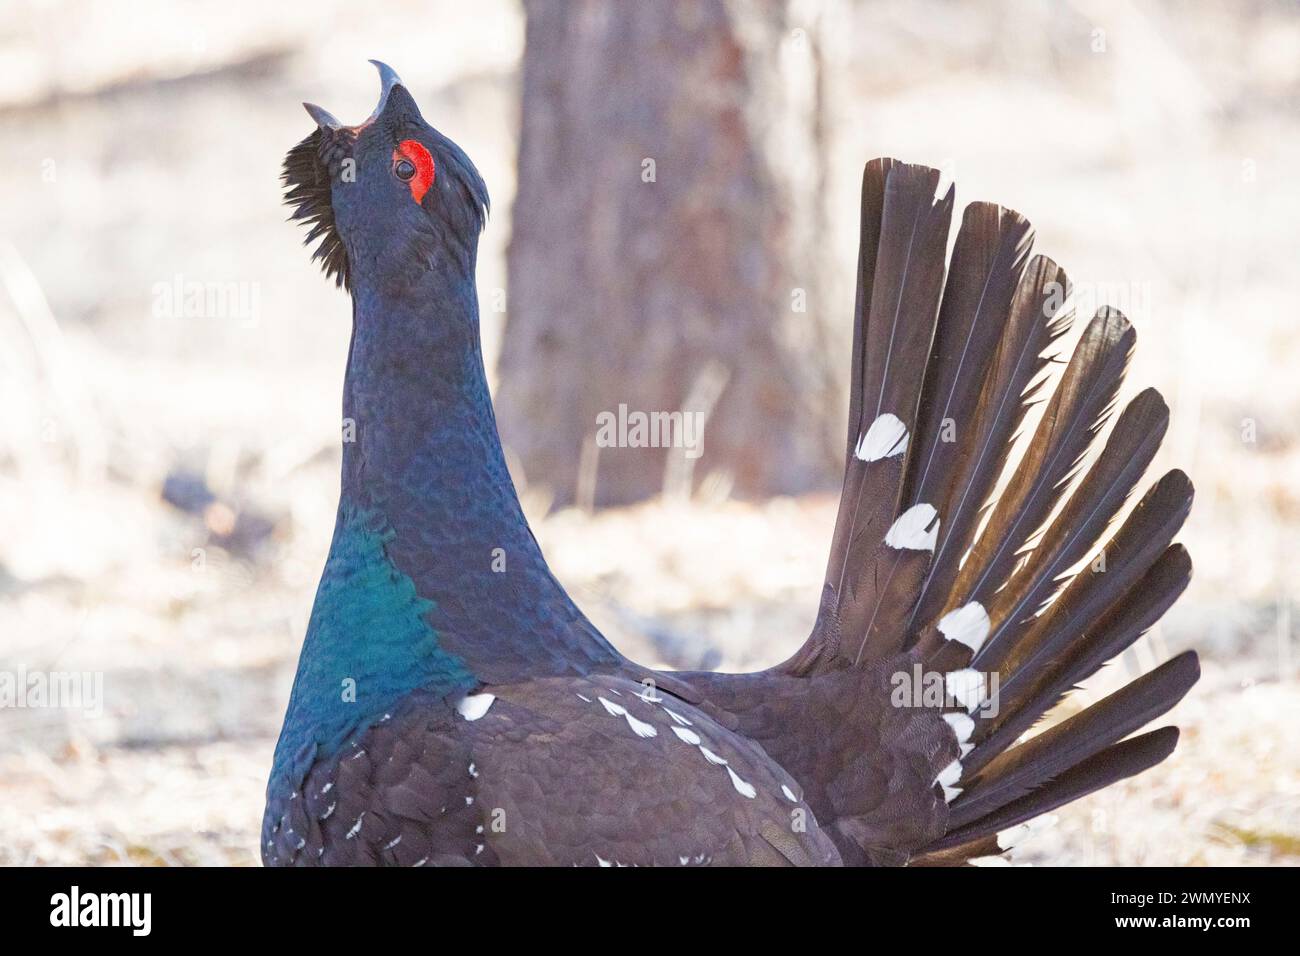 Mongolia, Tôv Province, Mongonmorit District, Dahurian Larch forest (Larix dahurica), Black-billed Capercaillie (Tetrao urogalloides formerly Tetrao parvirostris), in courtship display, on the ground Stock Photo